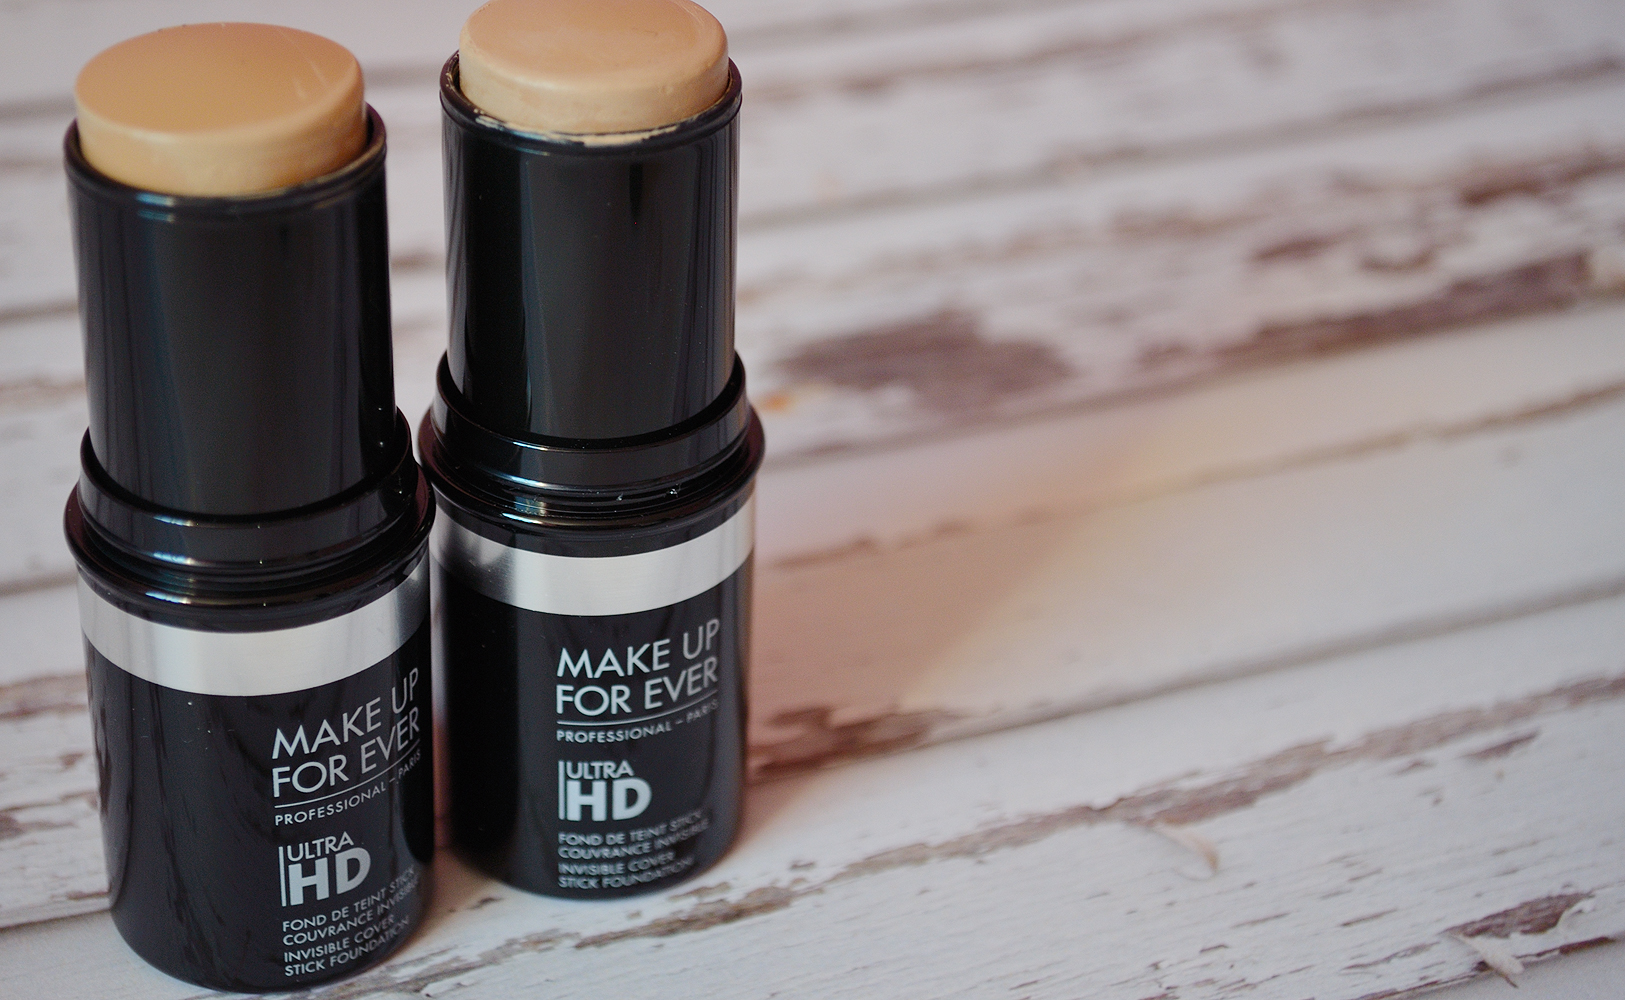 Make Up For Ever Ultra HD Invisible Cover Stick Foundation